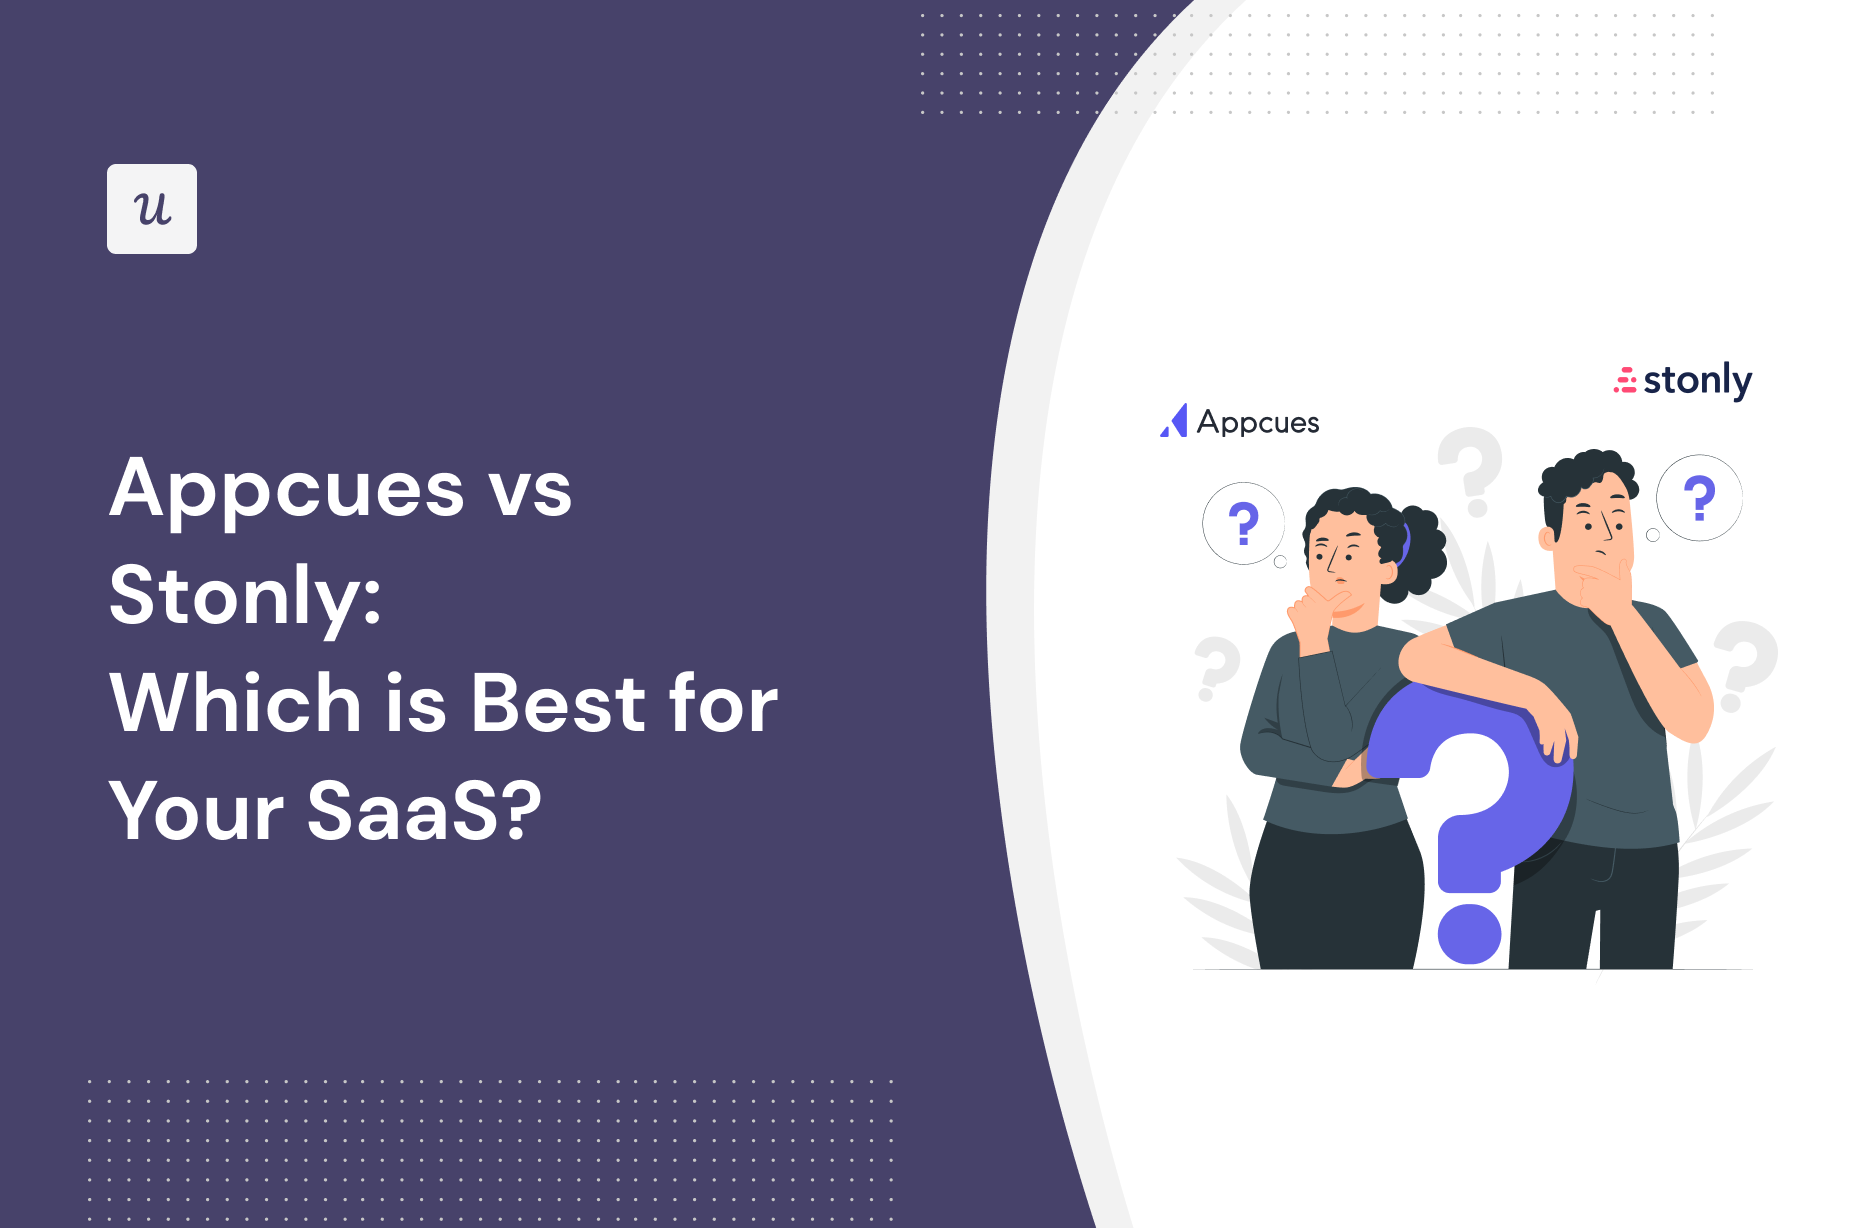 Appcues vs Stonly: Which is Best for Your SaaS?